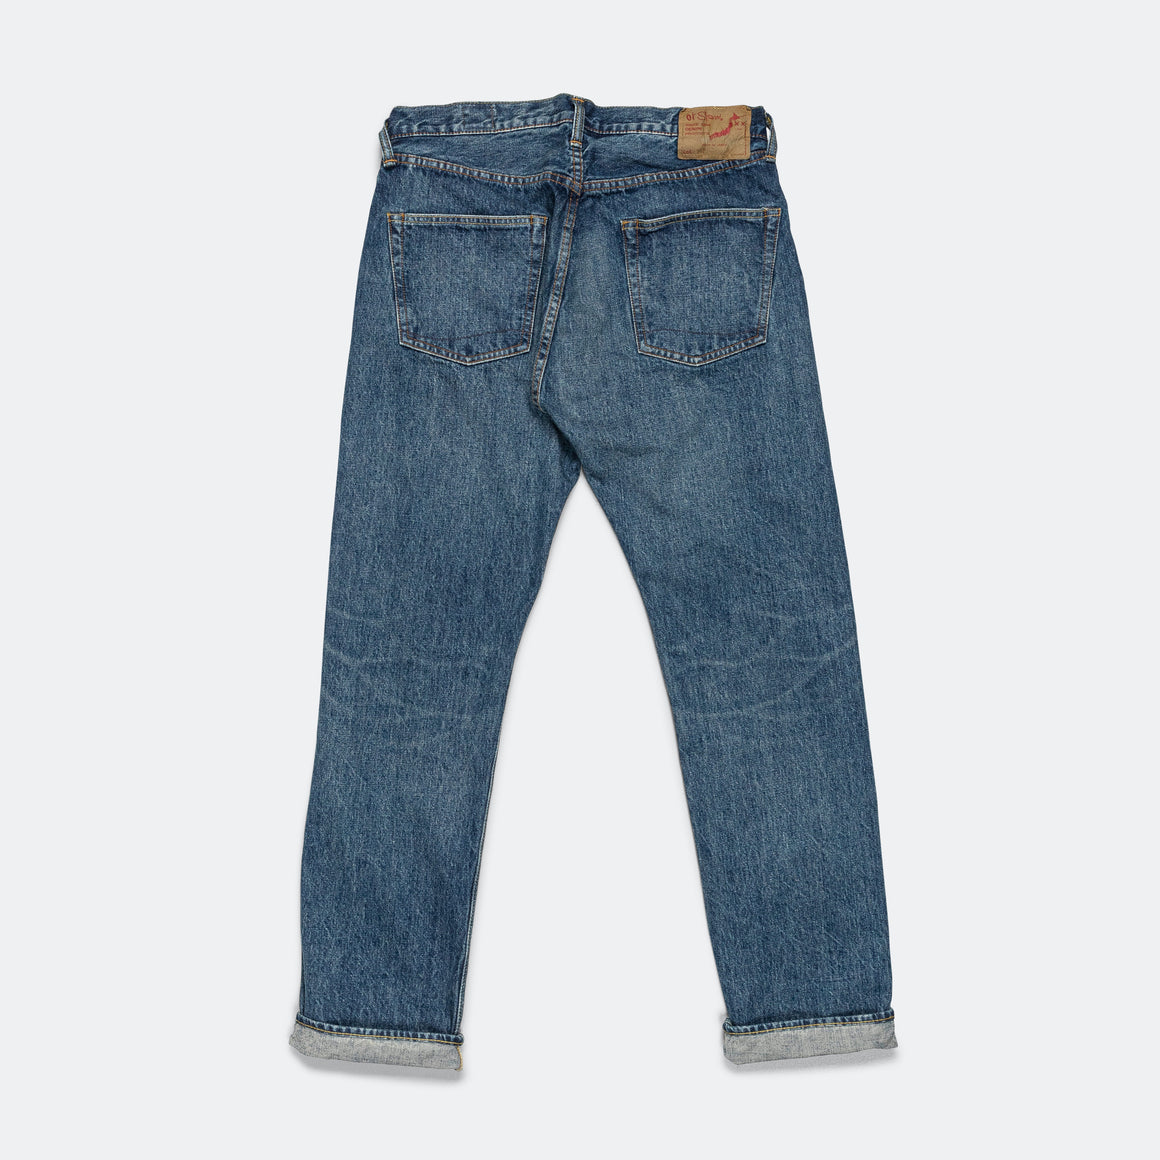 orSlow - 107 Ivy Selvedge Denim - 2 Year Wash - UP THERE